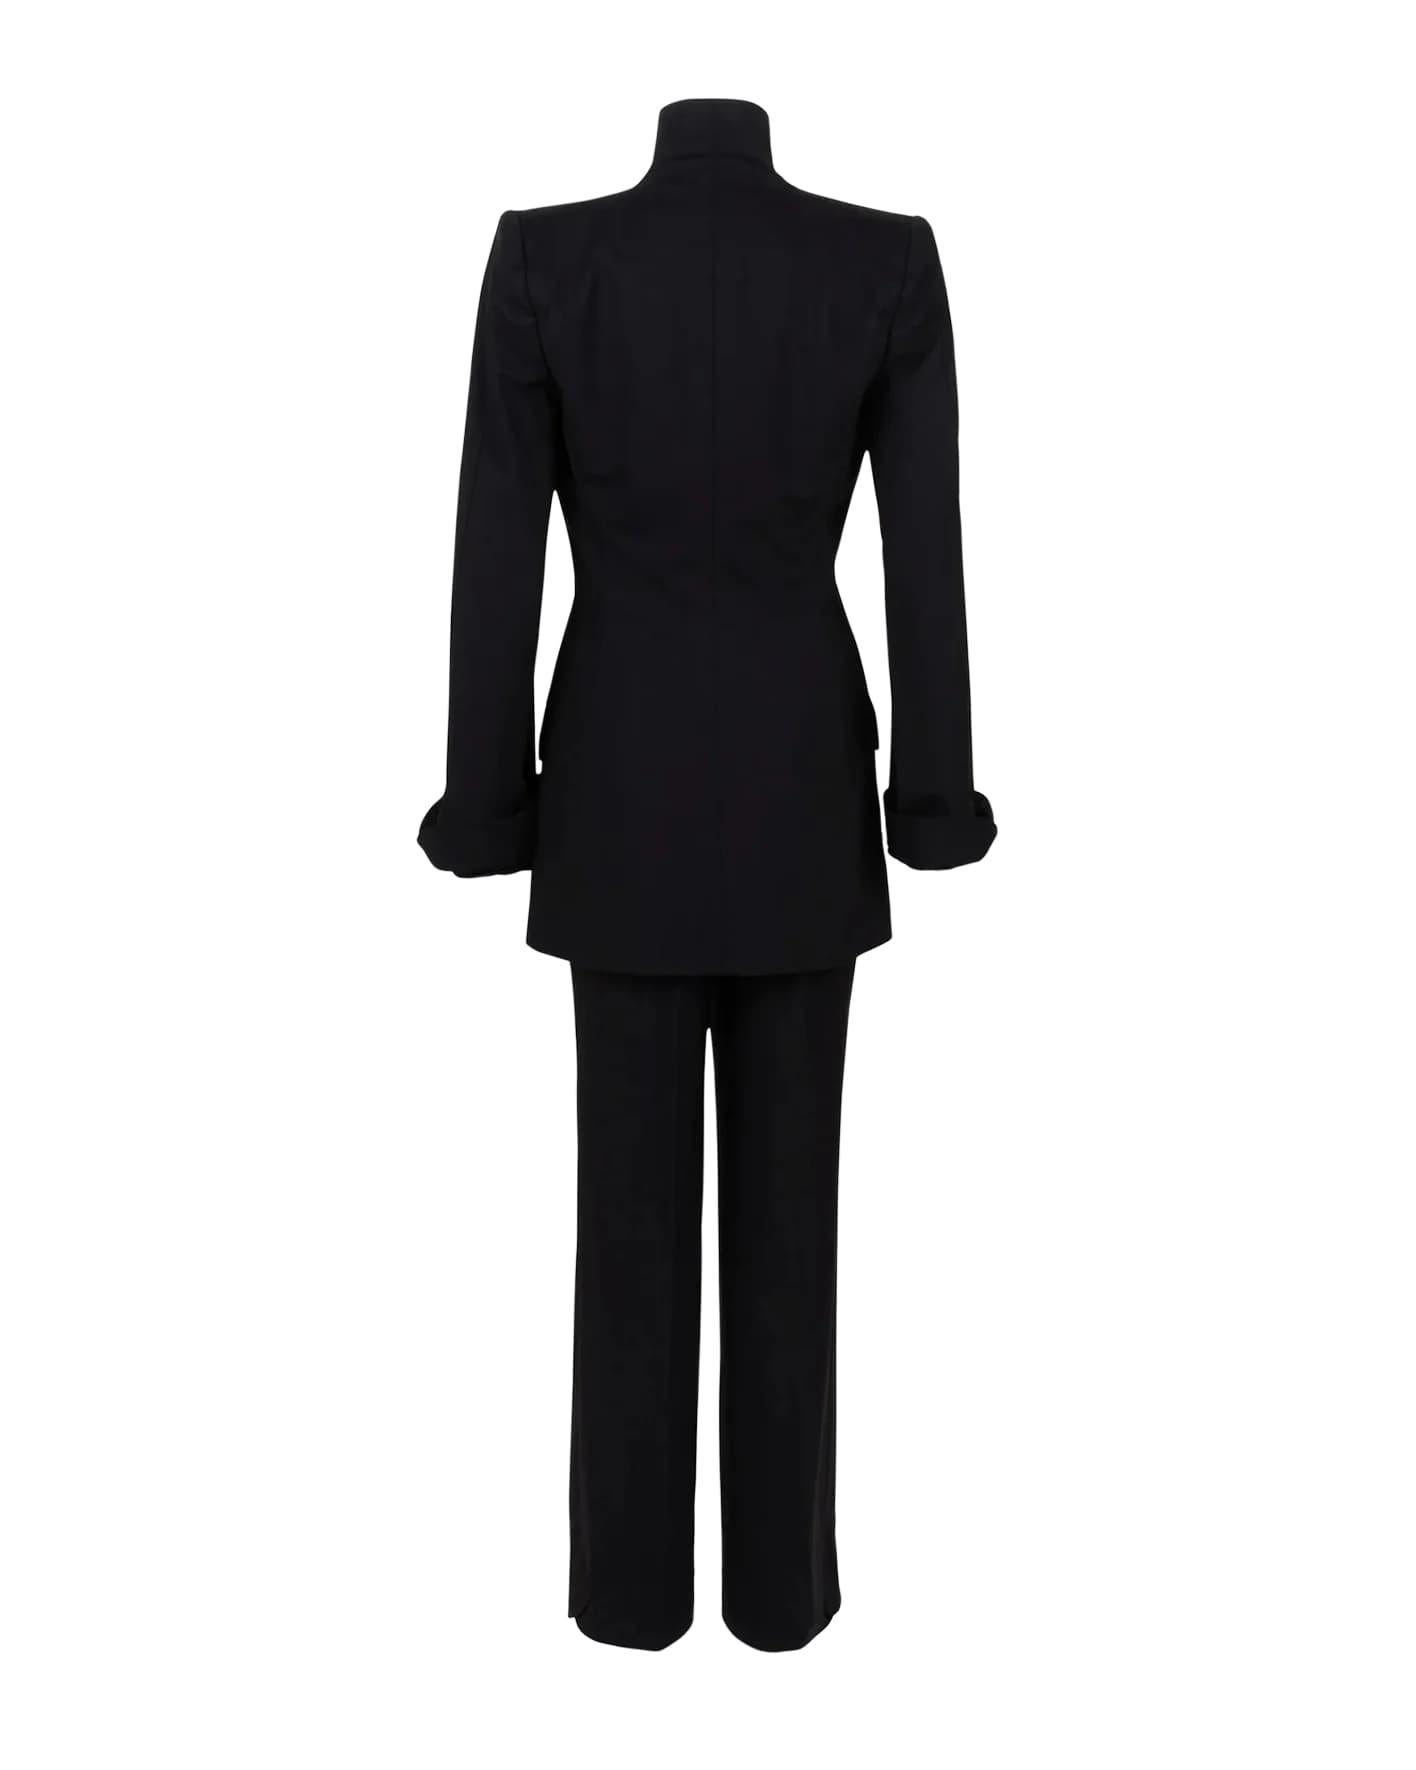 A/W 1997 Givenchy by Alexander McQueen Haute Couture double-breasted pant suit set. Simple, chic black wool suit from McQueen’s first year at Givenchy. Jacket has built up neckline, pockets, flared sleeves, and red rhinestone front closures. Pairs